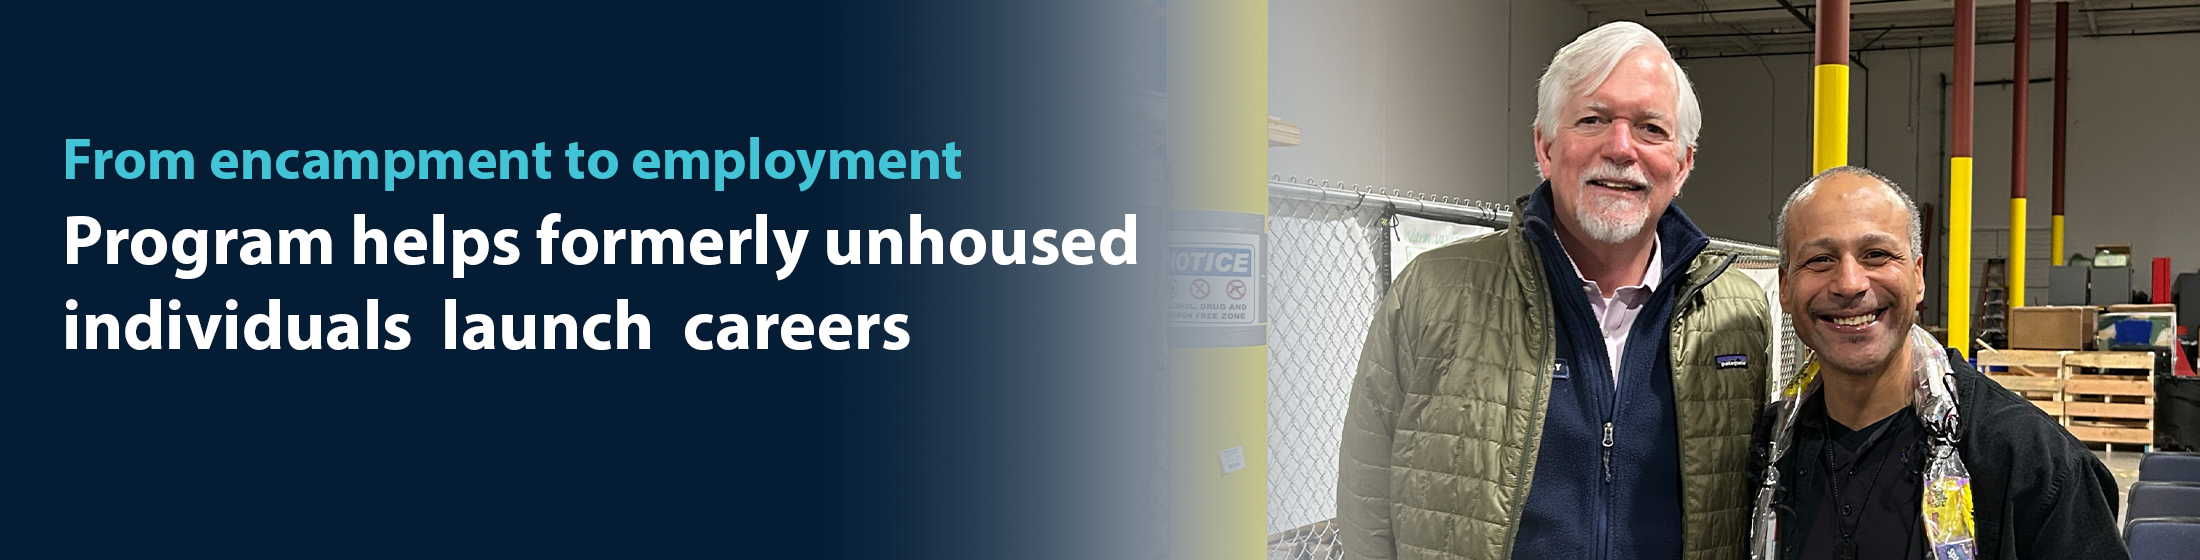 Graphic image with text that reads: From encampment to employment: Program helps formerly unhoused individuals launch careers accompanied by an image of two smiling men posing for a photo together. 